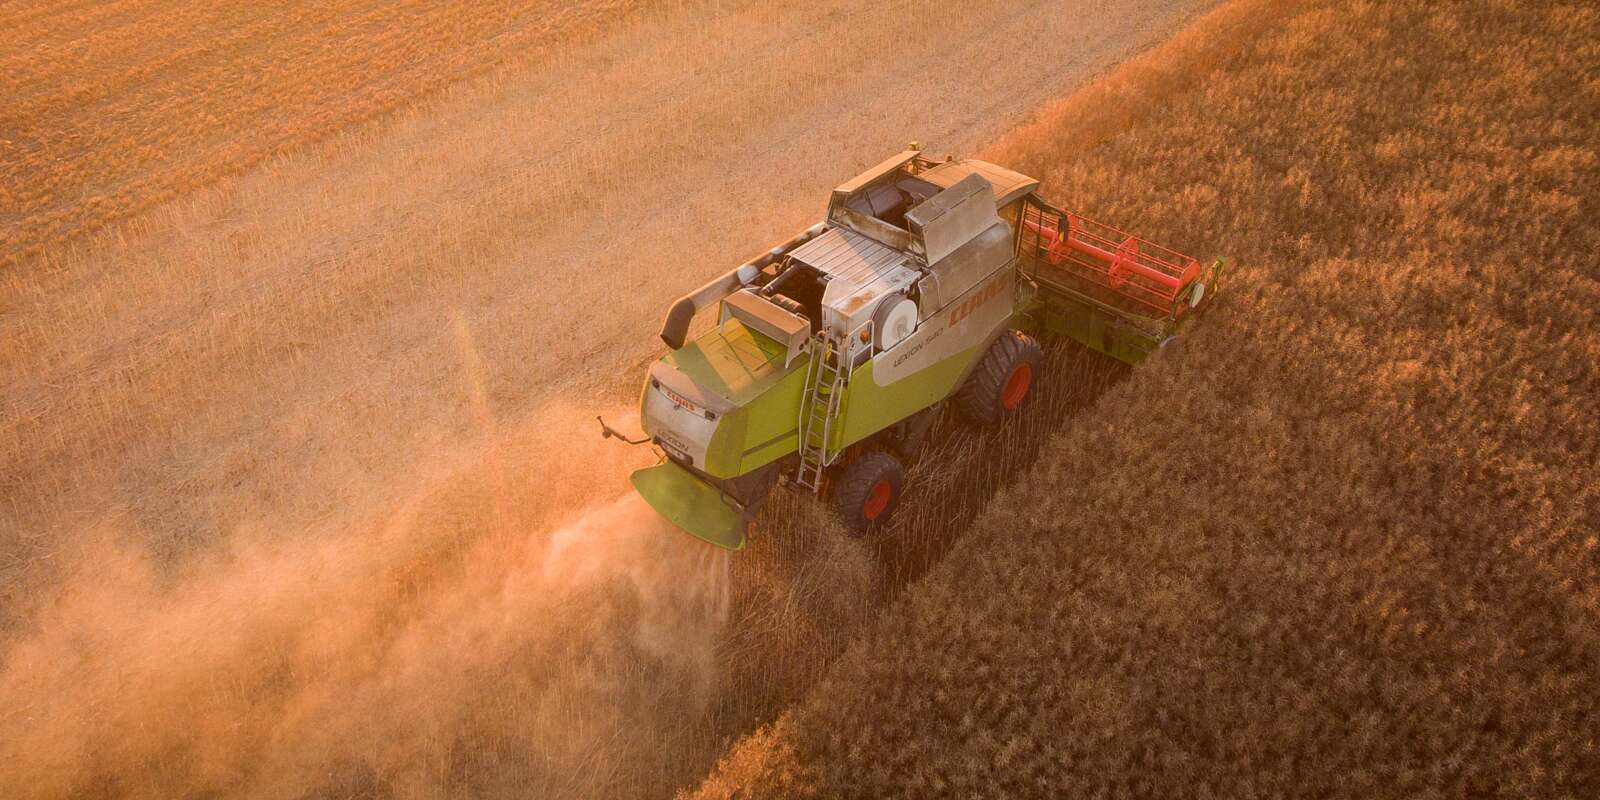 (FILES) This file photo taken on July 05, 2017 shows an aerial view of a combine harvester during a rape harvest on July 4, 2017 near Monthodon, central France. French Ecology Minister Nicolas Hulot said on Novemver 8, 2017 that France won't vote to extend the glyphosate licence more than three years. The European Commission said on November 27, 2017 it will ask EU countries to vote next month on a proposal to renew for five years instead of 10 the licence for the controversial weedkiller glyphosate. / AFP PHOTO / GUILLAUME SOUVANT